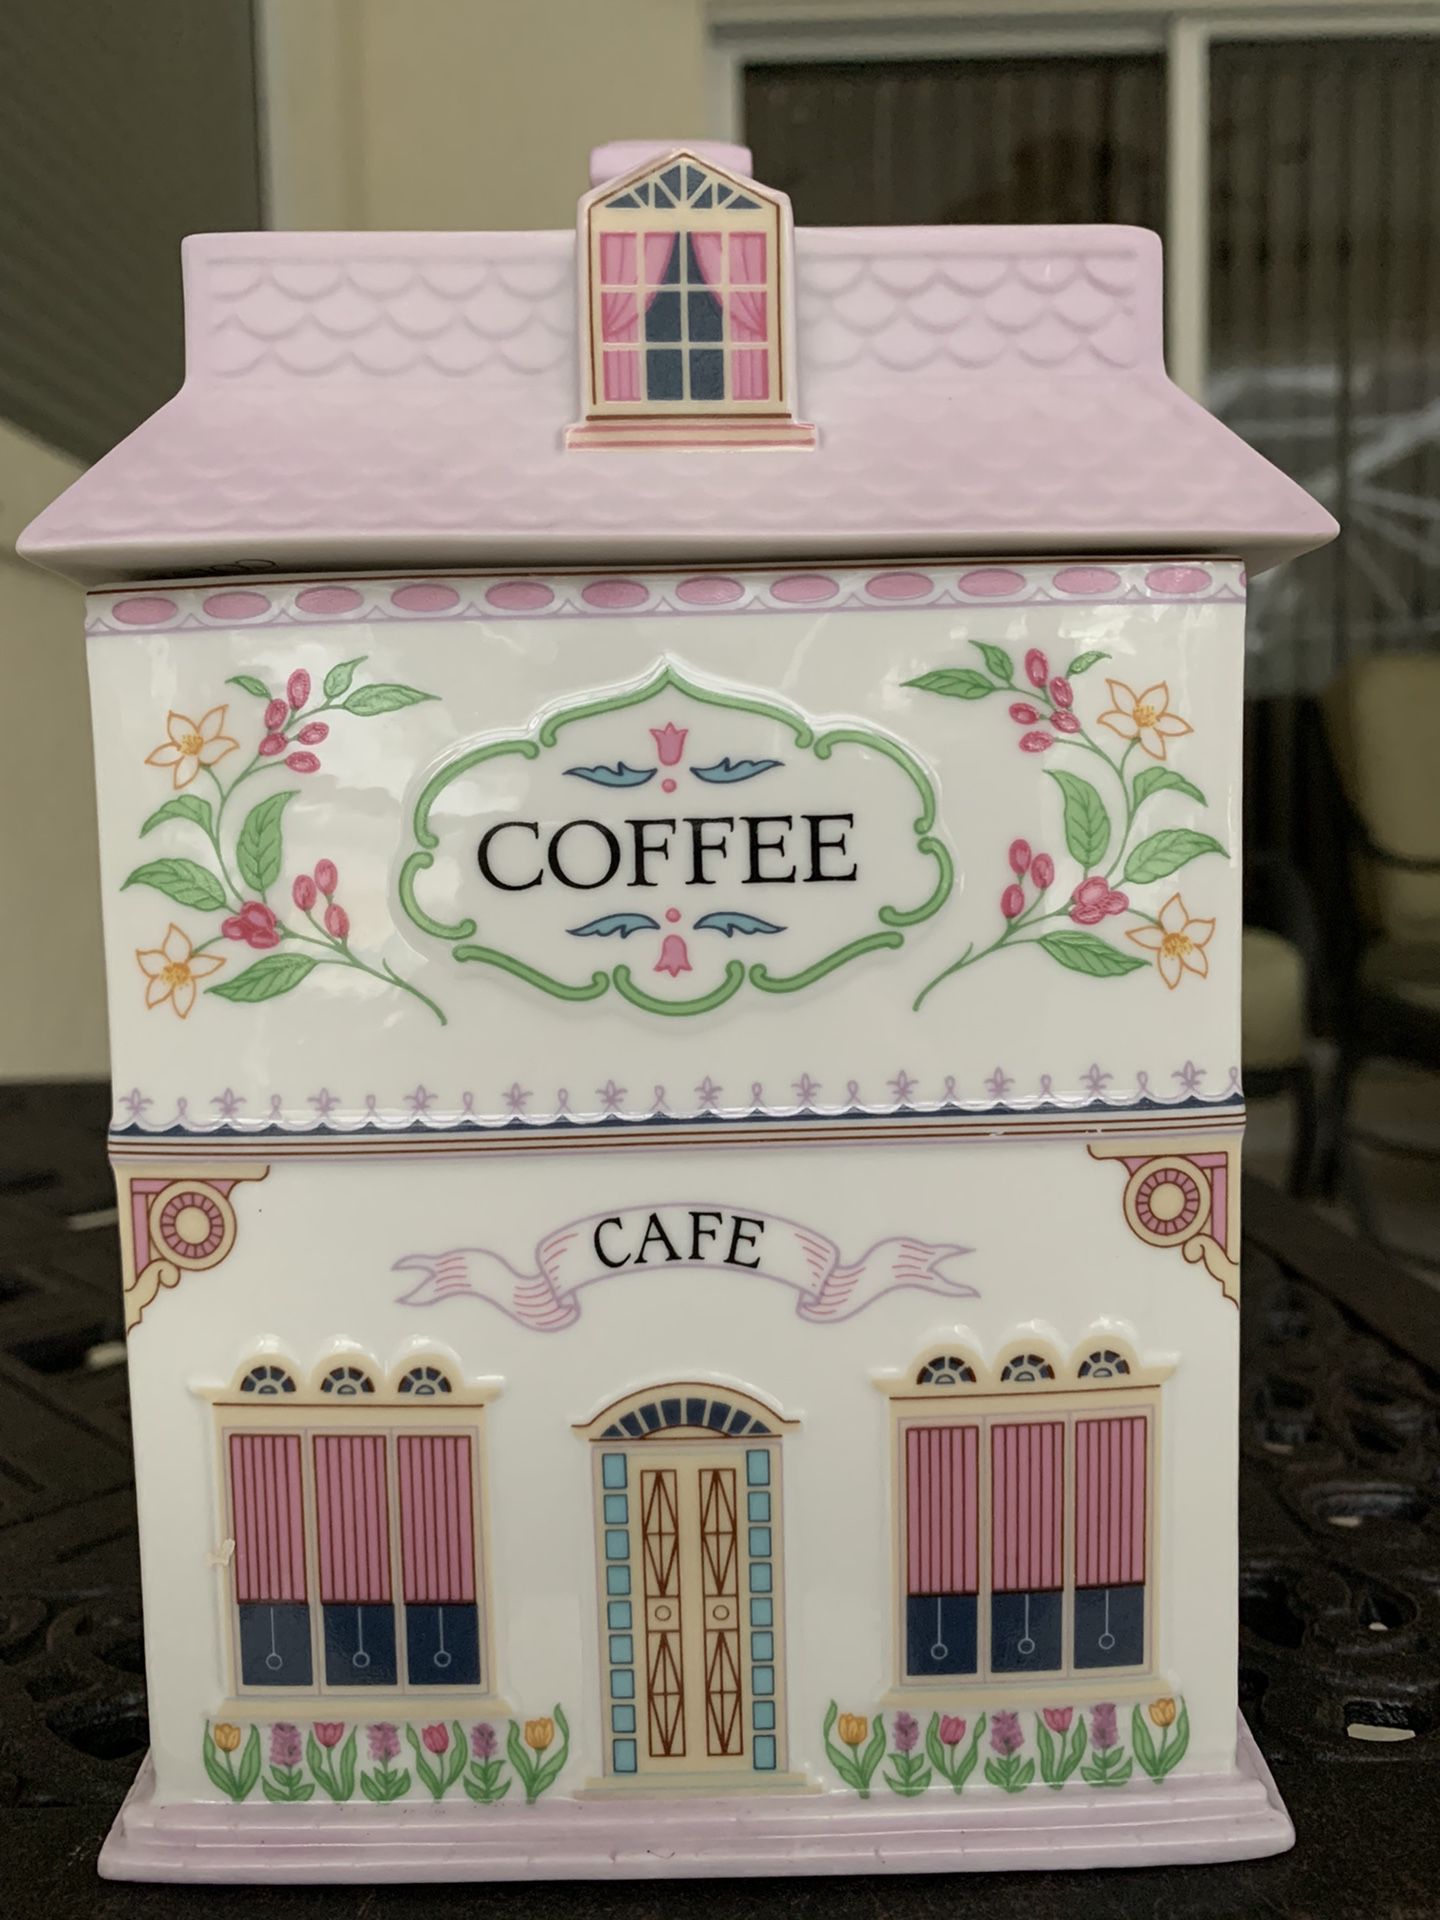 1990s The Lenox Village Coffee CAFE Canister with lid Fine Porcelain Vintage  Approx 8” x 5” Overall in great clean condition   Please see last pictur